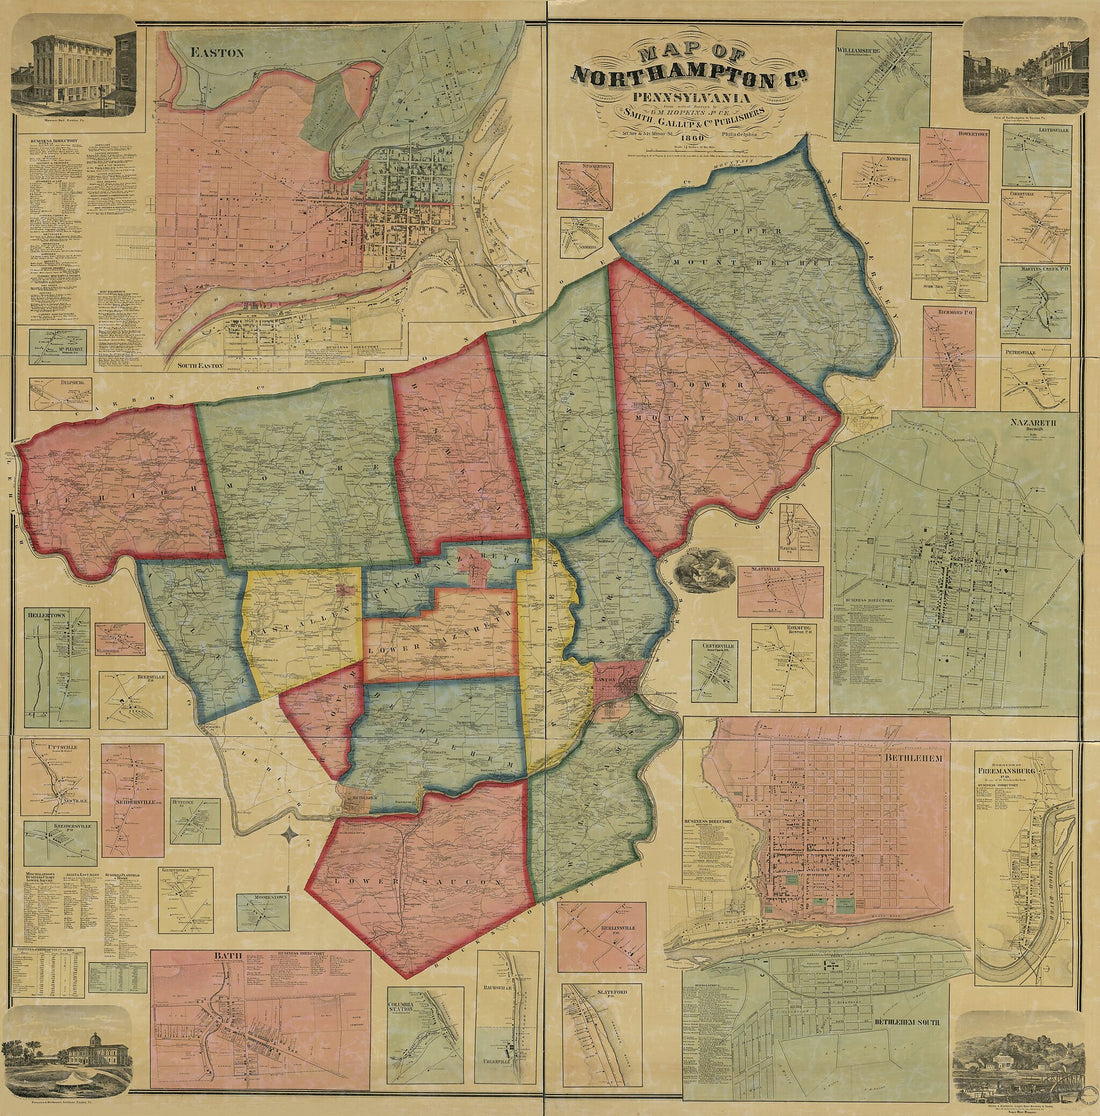 This old map of Map of Northampton County, Pennsylvania : from Actual Surveys from 1860 was created by Griffith Morgan Hopkins, Gallup &amp; Co Smith in 1860